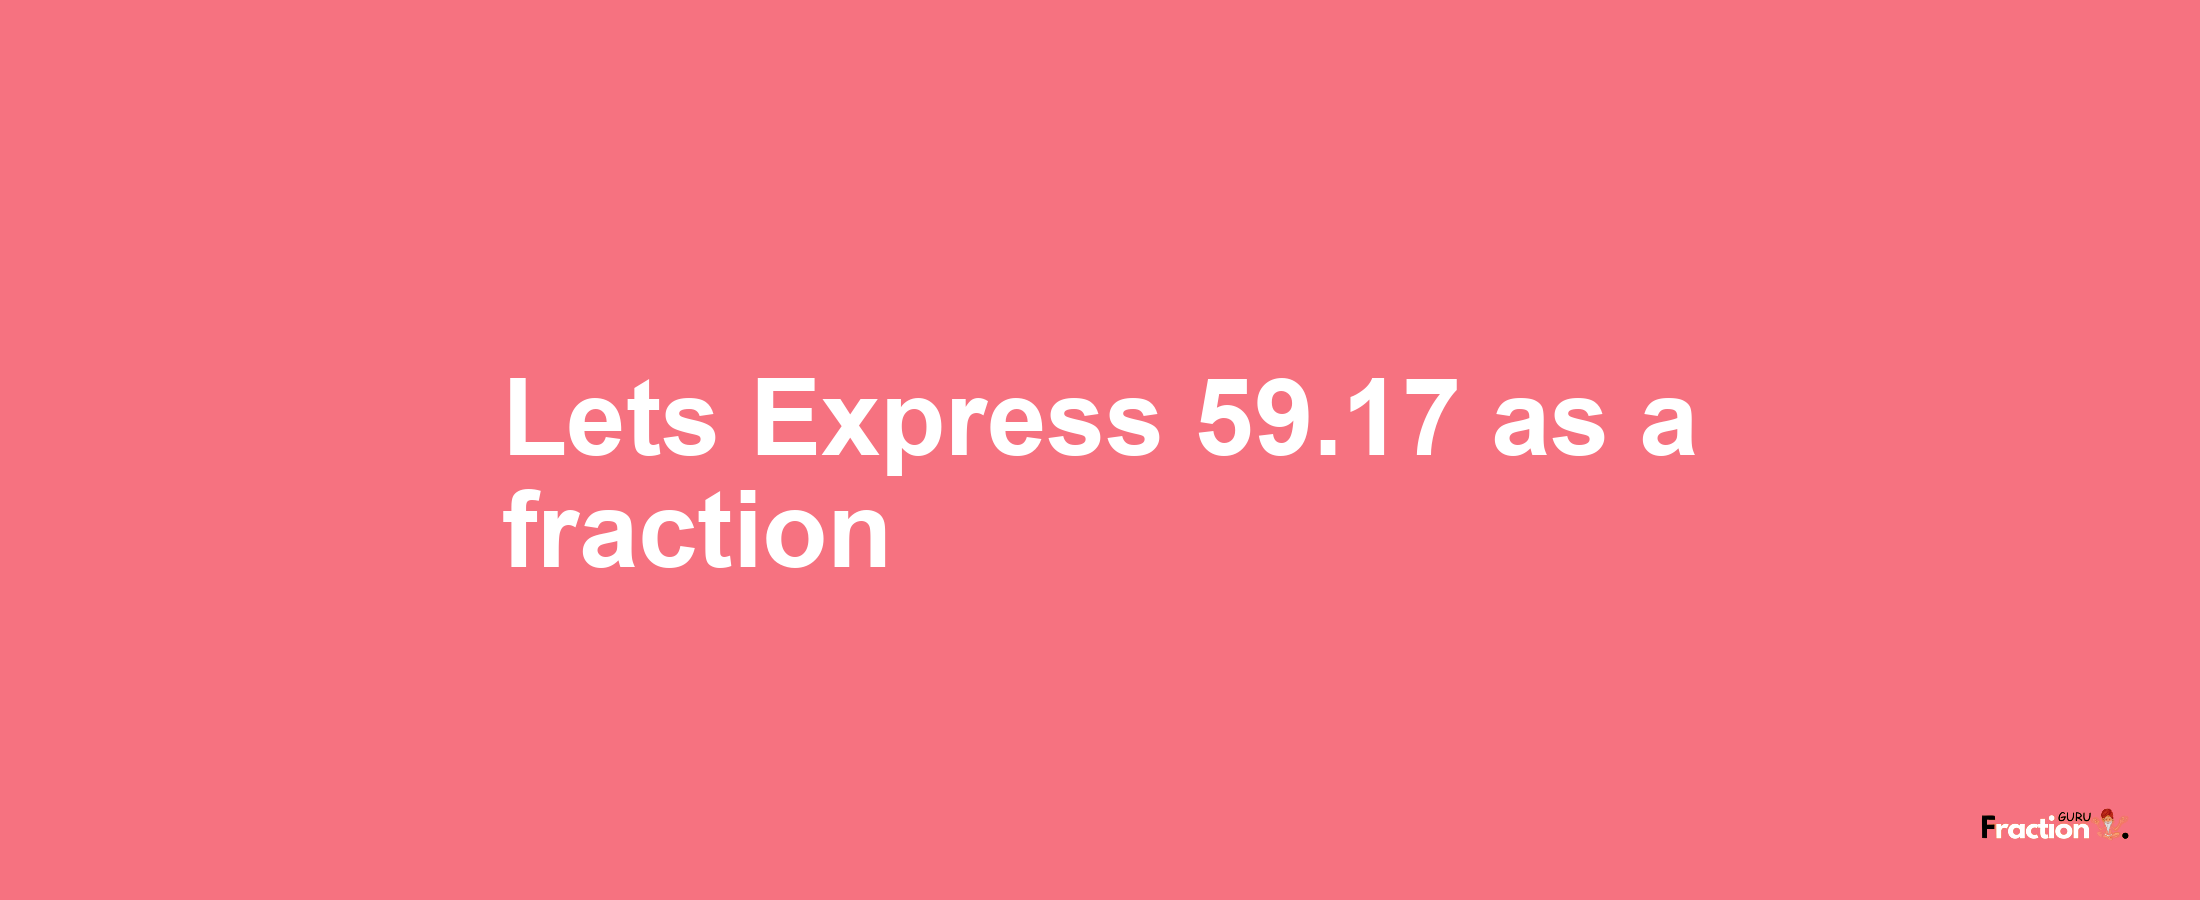 Lets Express 59.17 as afraction